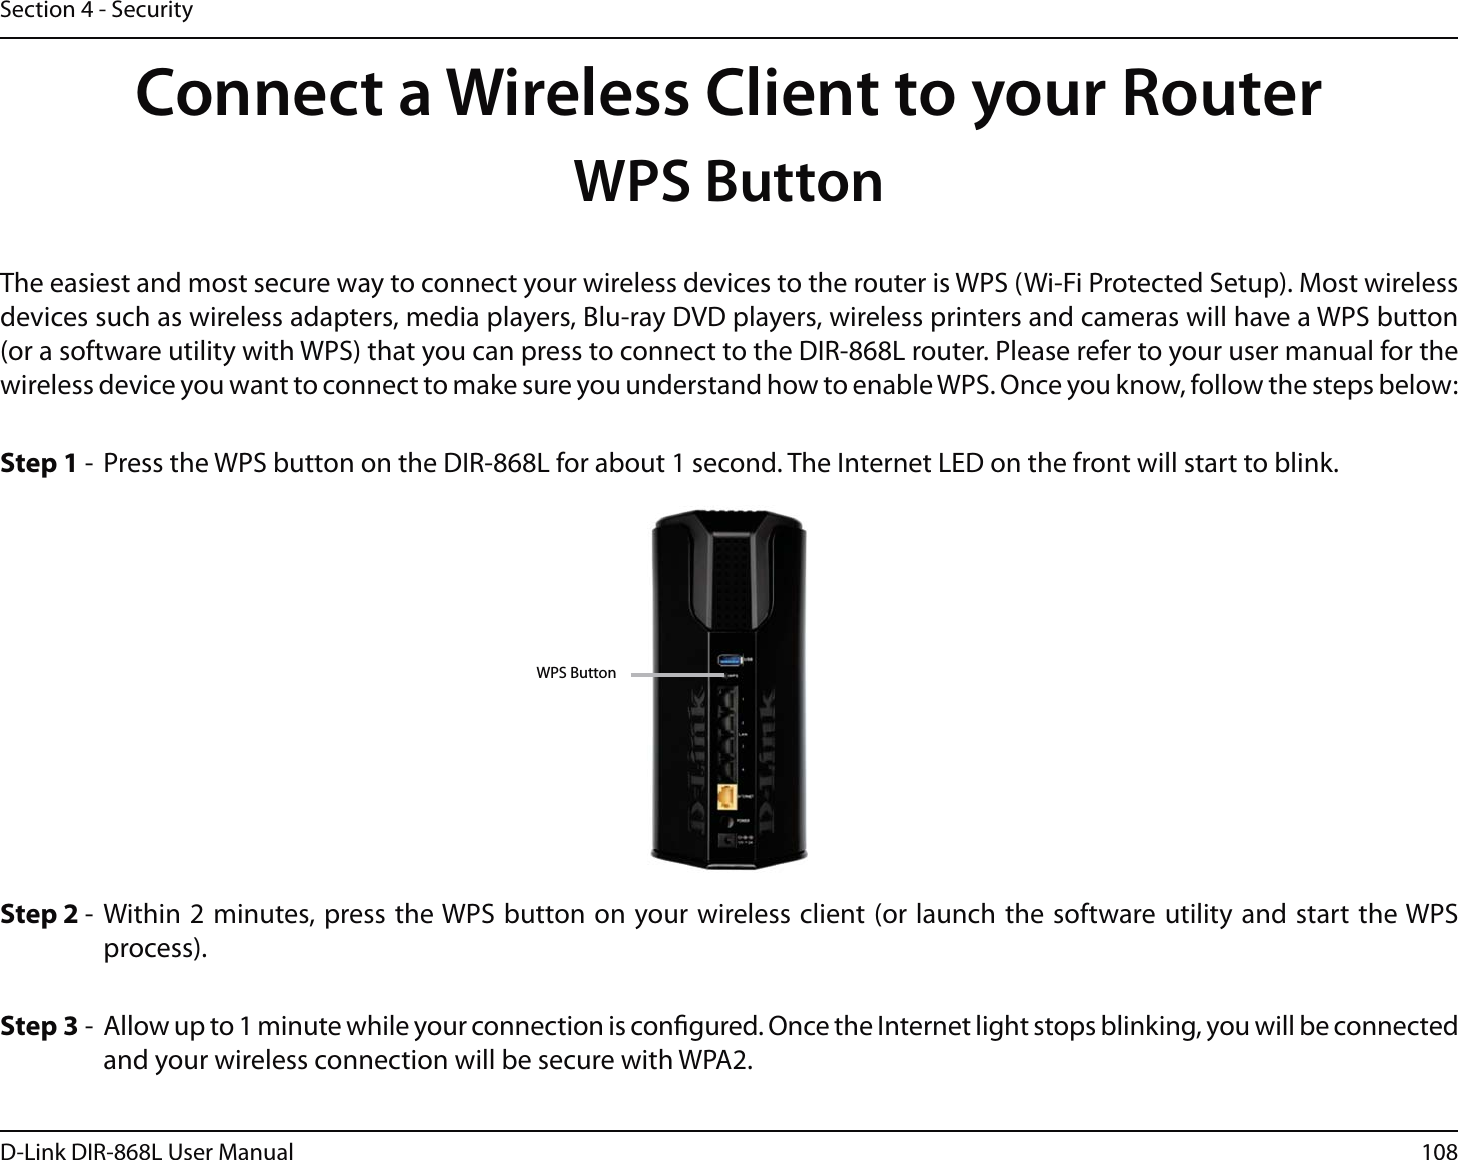 108D-Link DIR-868L User ManualSection 4 - SecurityConnect a Wireless Client to your RouterWPS ButtonStep 2 - Within 2 minutes, press the WPS button on your wireless client (or launch the software utility and start the WPS process).The easiest and most secure way to connect your wireless devices to the router is WPS (Wi-Fi Protected Setup). Most wireless devices such as wireless adapters, media players, Blu-ray DVD players, wireless printers and cameras will have a WPS button (or a software utility with WPS) that you can press to connect to the DIR-868L router. Please refer to your user manual for the wireless device you want to connect to make sure you understand how to enable WPS. Once you know, follow the steps below:Step 1 -  Press the WPS button on the DIR-868L for about 1 second. The Internet LED on the front will start to blink.Step 3 -  Allow up to 1 minute while your connection is congured. Once the Internet light stops blinking, you will be connected and your wireless connection will be secure with WPA2.WPS Button